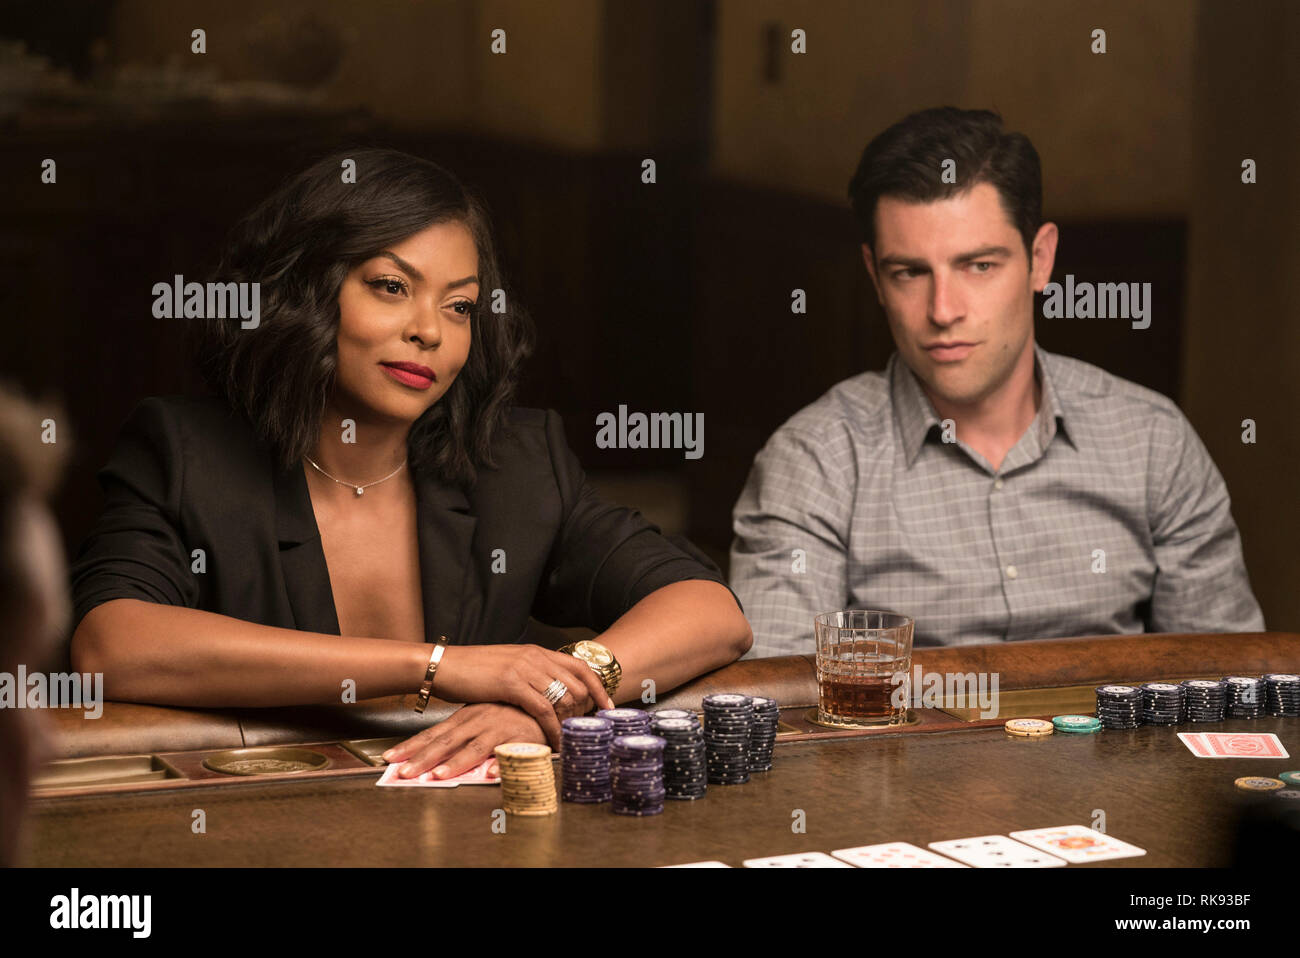 RELEASE DATE: February 8, 2019 TITLE: What Men Want STUDIO: Paramount Pictures DIRECTOR: Adam Shankman PLOT: A woman is boxed out by the male sports agents in her profession, but gains an unexpected edge over them when she develops the ability to hear men's thoughts. STARRING: TARAJI P. HENSON as Ali Davis. (Credit Image: © Paramount Pictures/Entertainment Pictures) Stock Photo